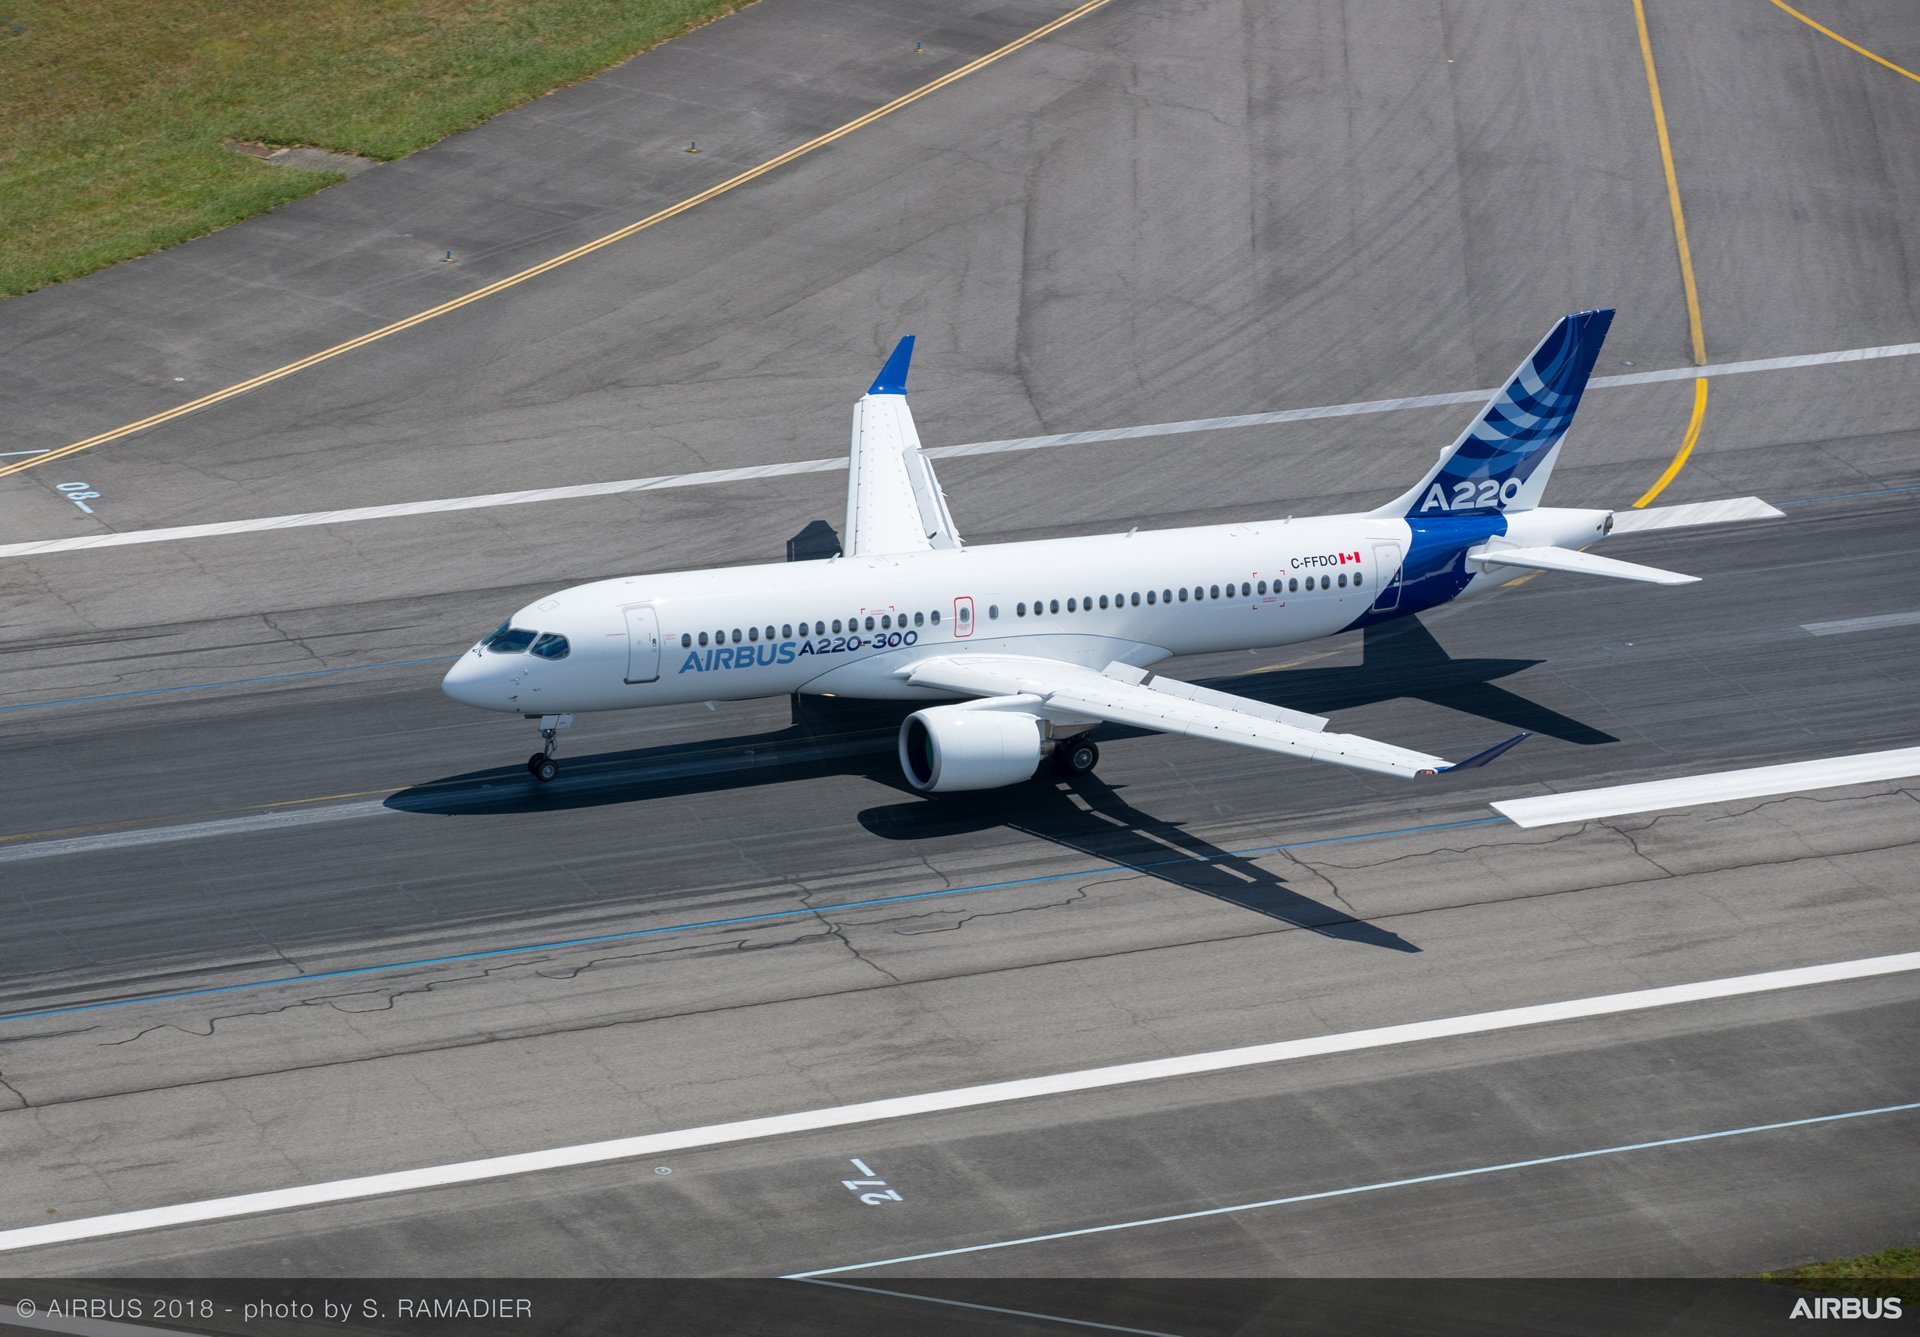 Airbus-A220-300-new-member-of-the-airbus